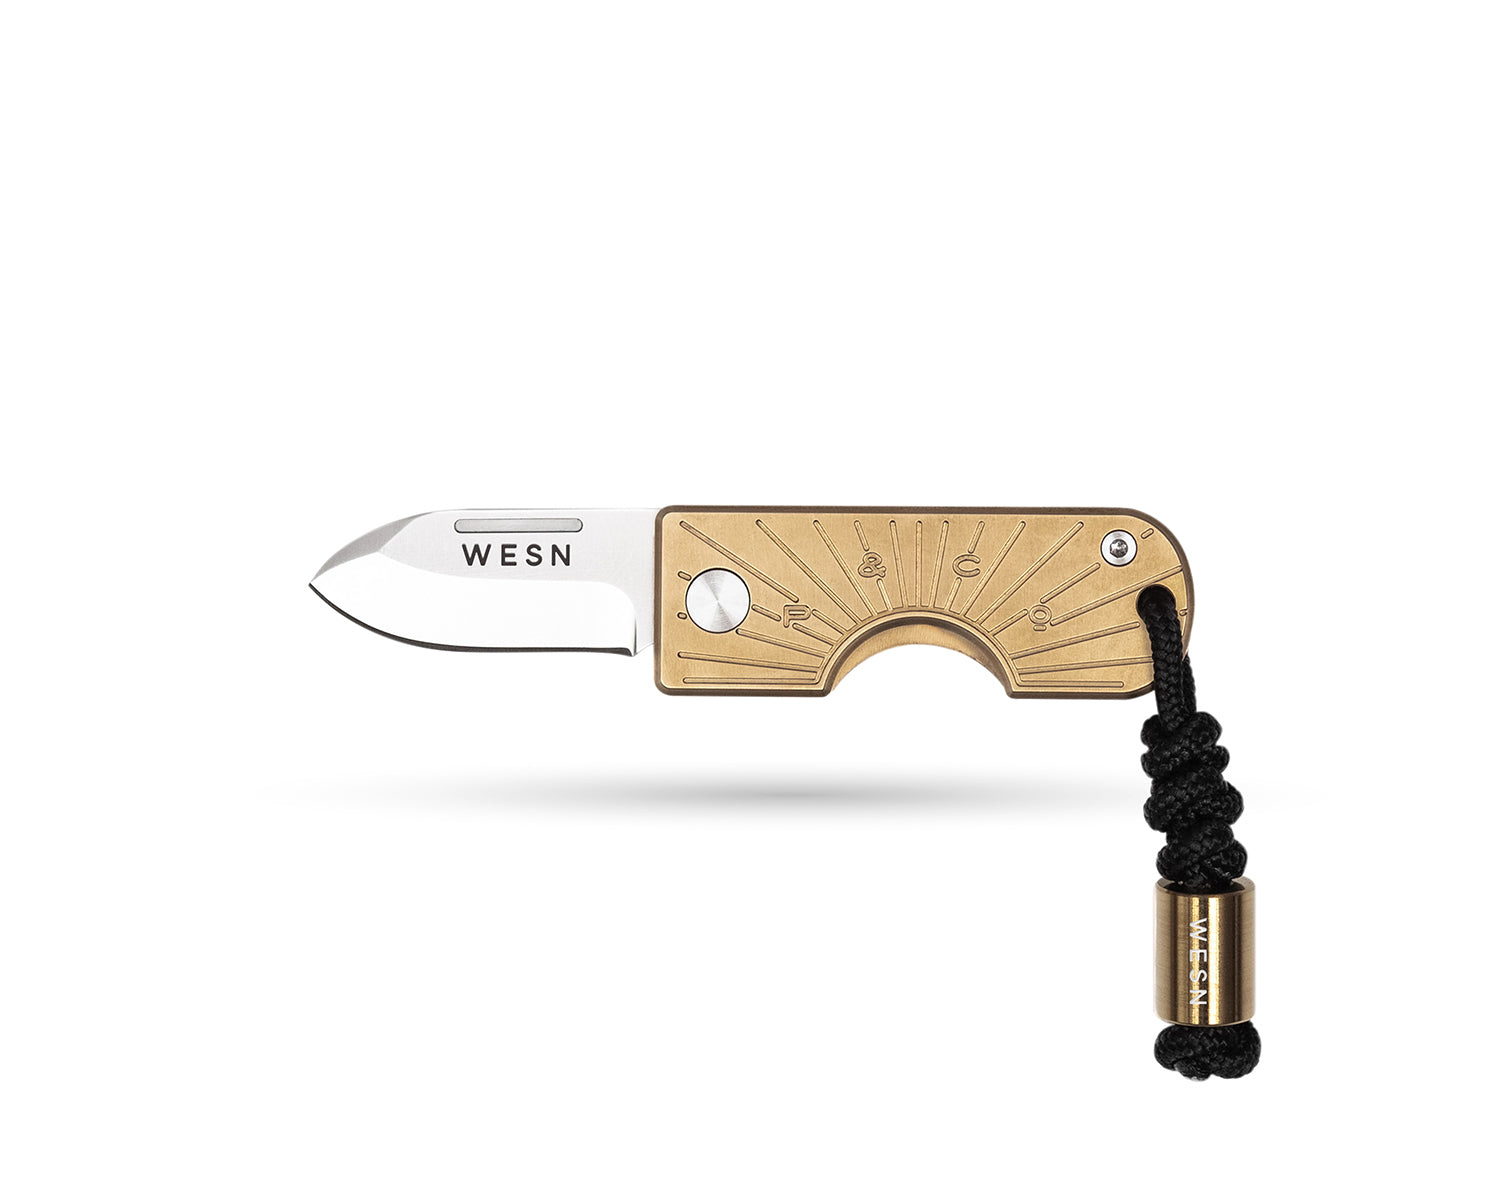 WESN x P&Co — The Slipjoint Microblade